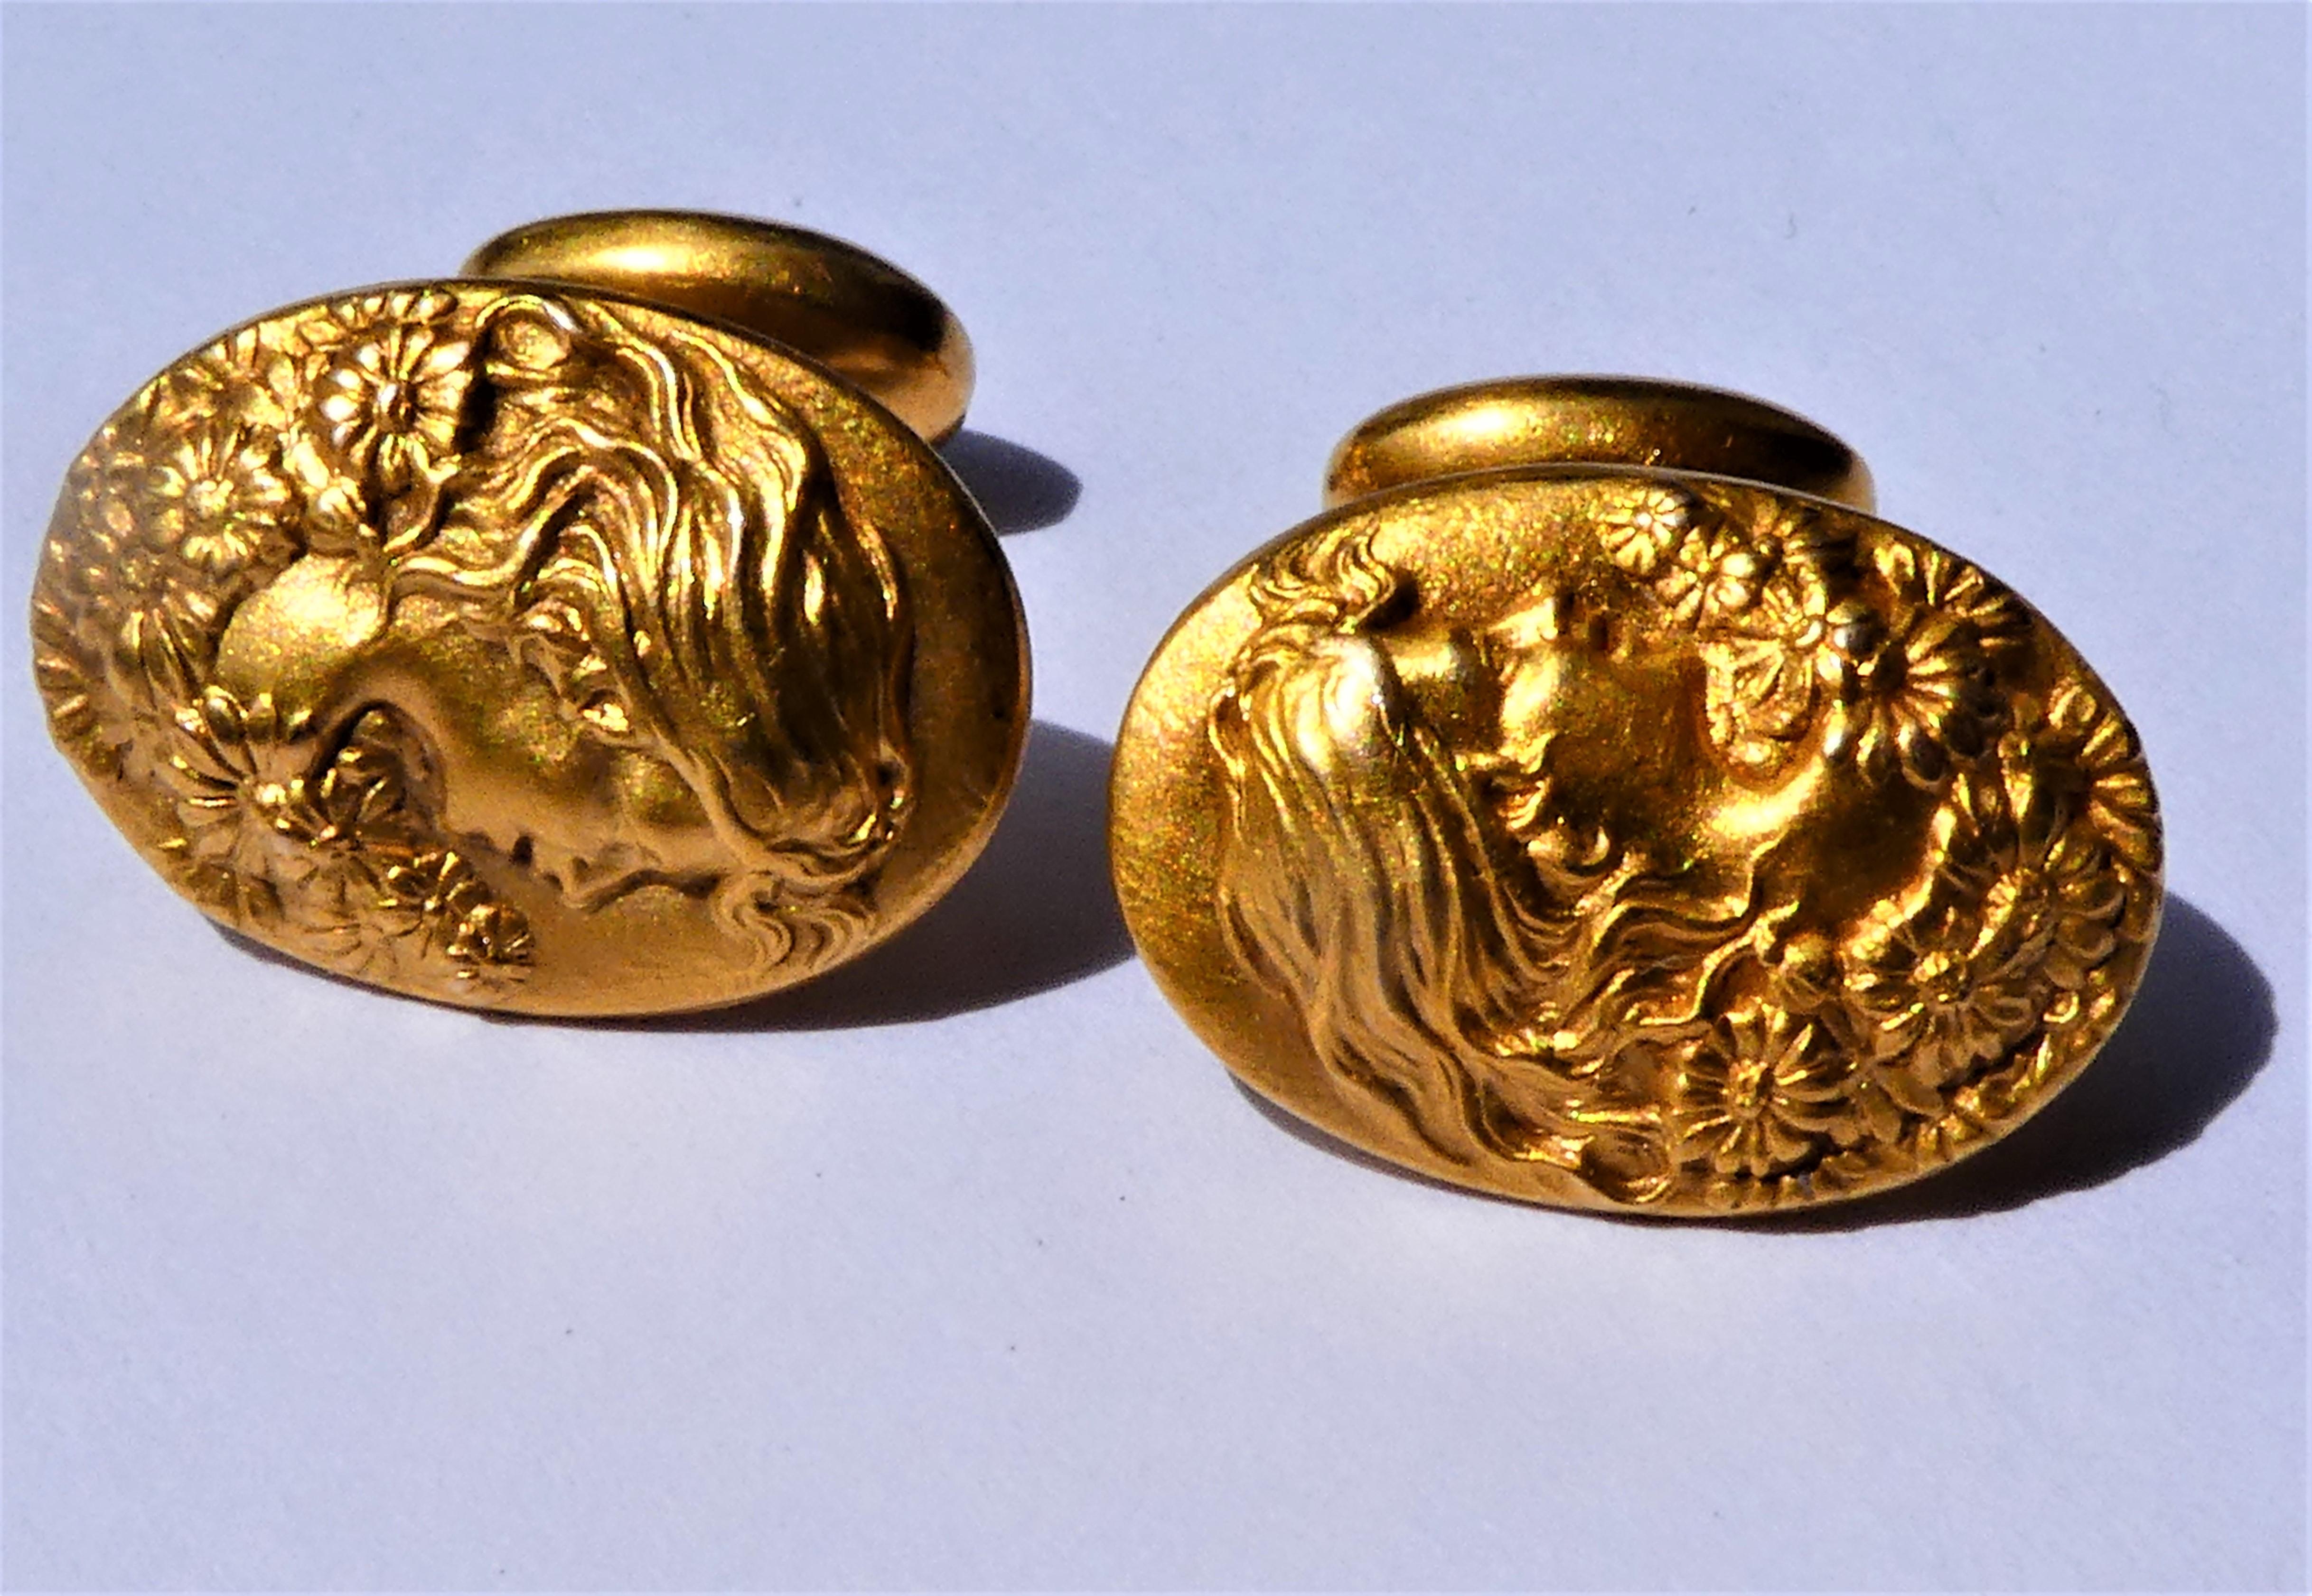 The oval cufflinks show a smiling lady with long hair and flowers. They were crafted around 1900 by an American maker in 14 karat yellow gold and are slightly curved on the edge. The solid gold cuff buttons have a dumb-bell link. They are